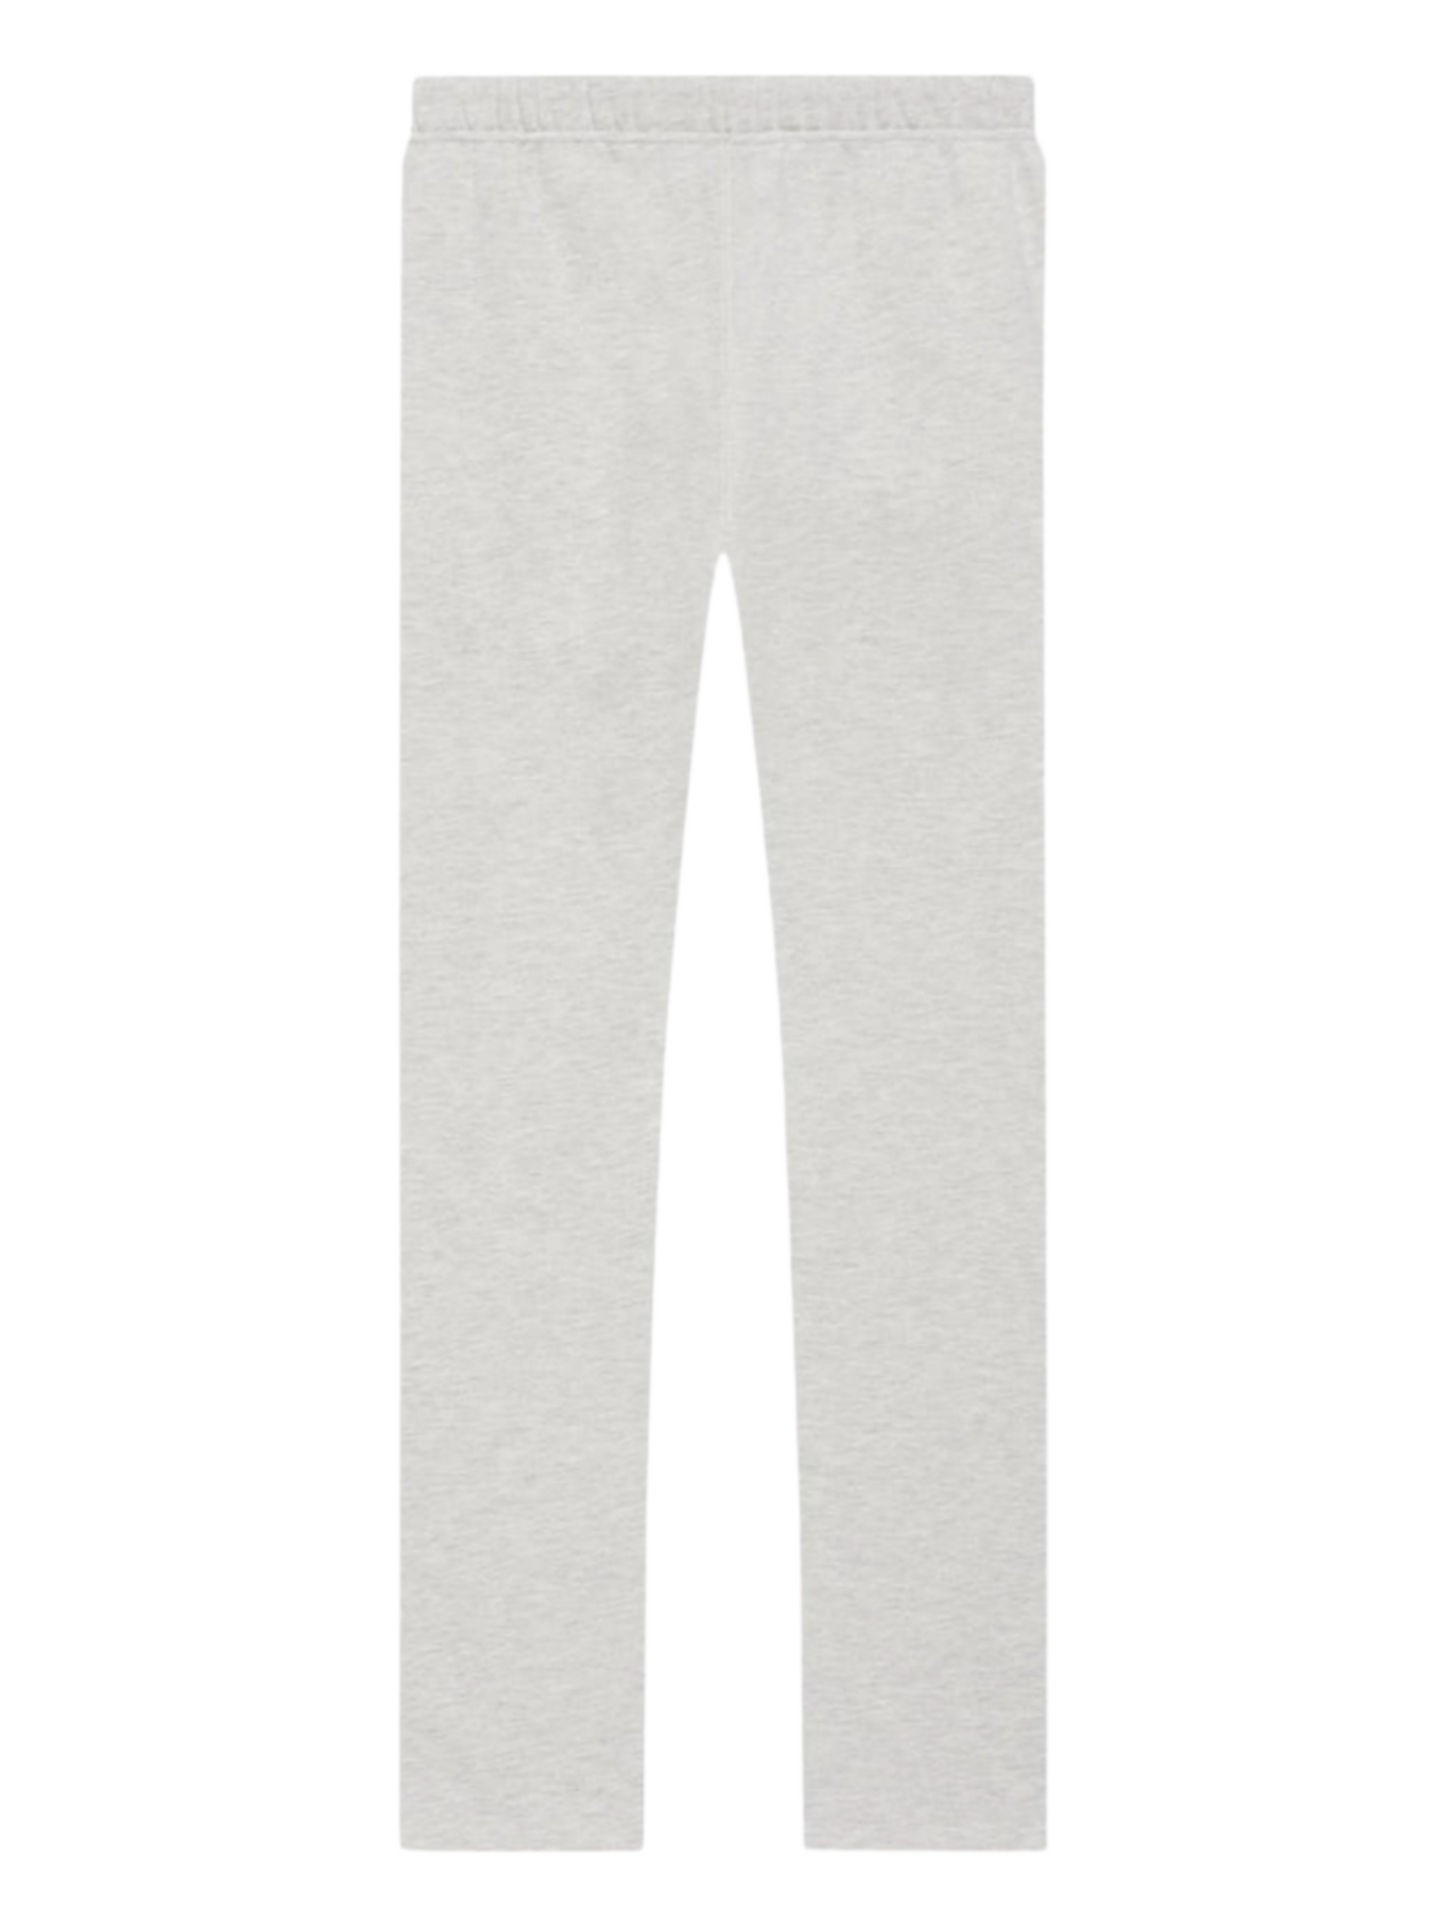 Essentials Fear of God Light Oatmeal Fleece Relaxed Sweatpants FW22 — Genuine Design Luxury Consignment for Men. New & Pre-Owned Clothing, Shoes, & Accessories. Calgary, Canada